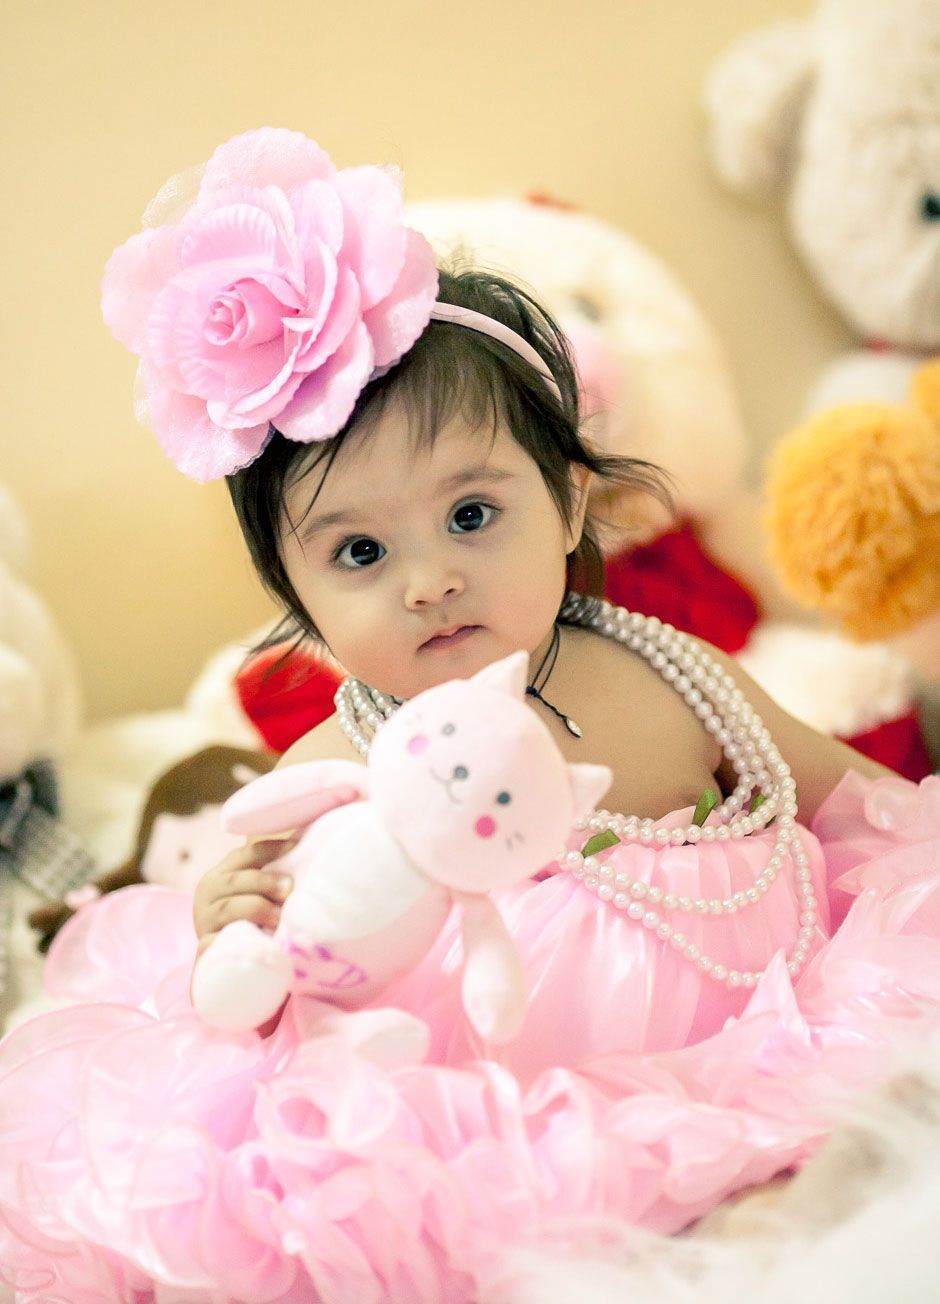 Best child photography India cutest thing on earth!. Newborn photography girl, Baby girl picture, Cute baby wallpaper